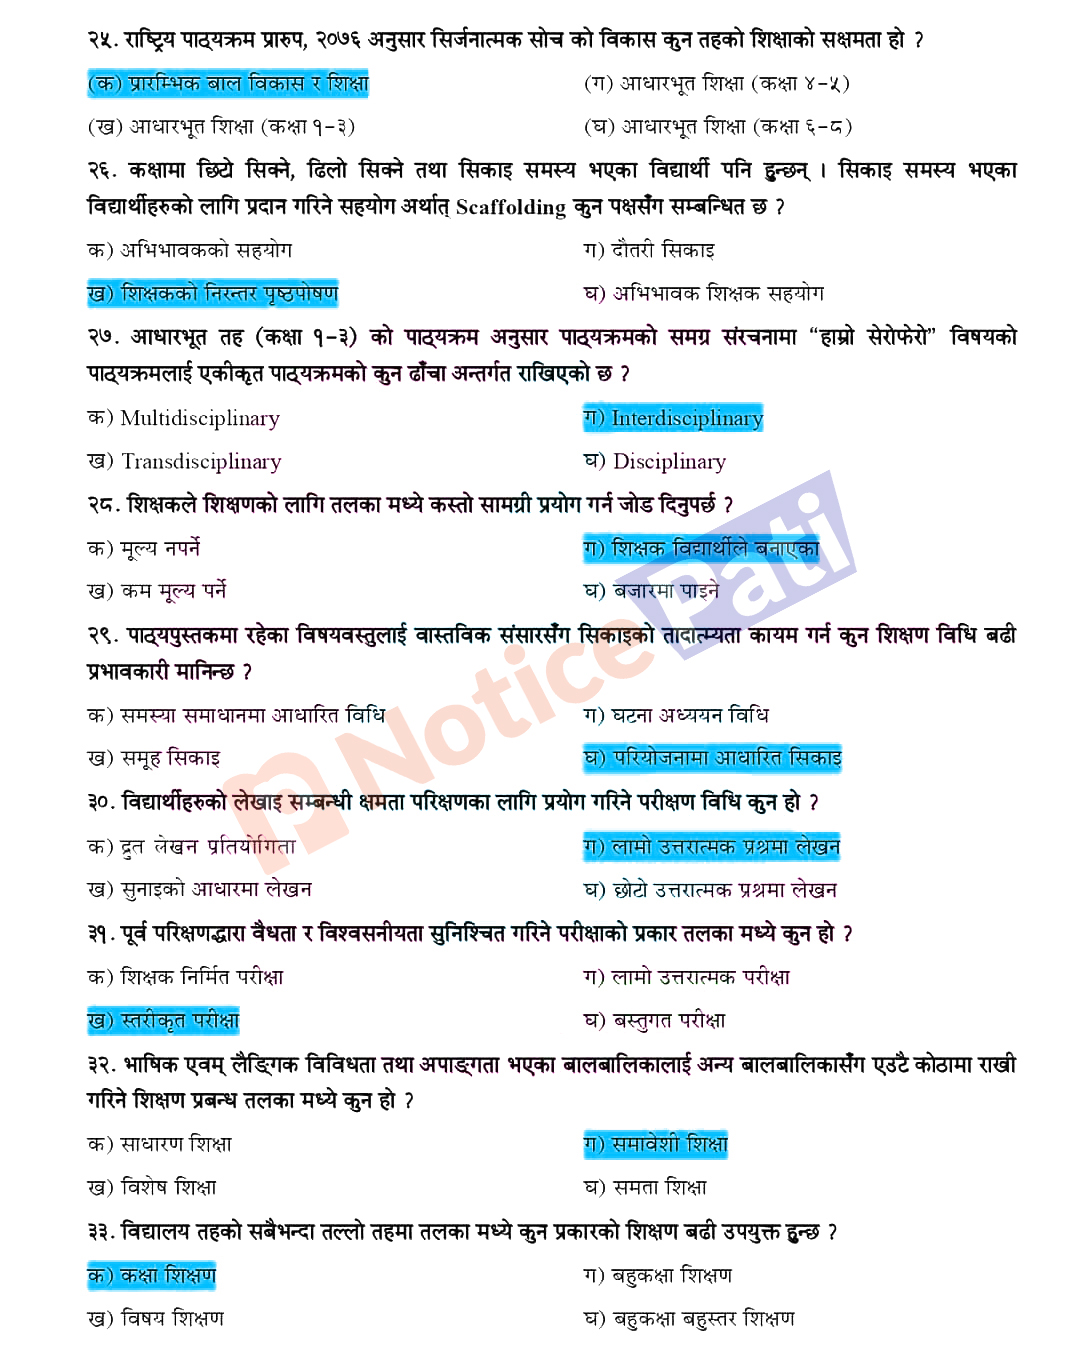 In this post we will post the Shiksha Sewa Aayog Primary Level (Pra Vi) Exam Question Paper 2080: